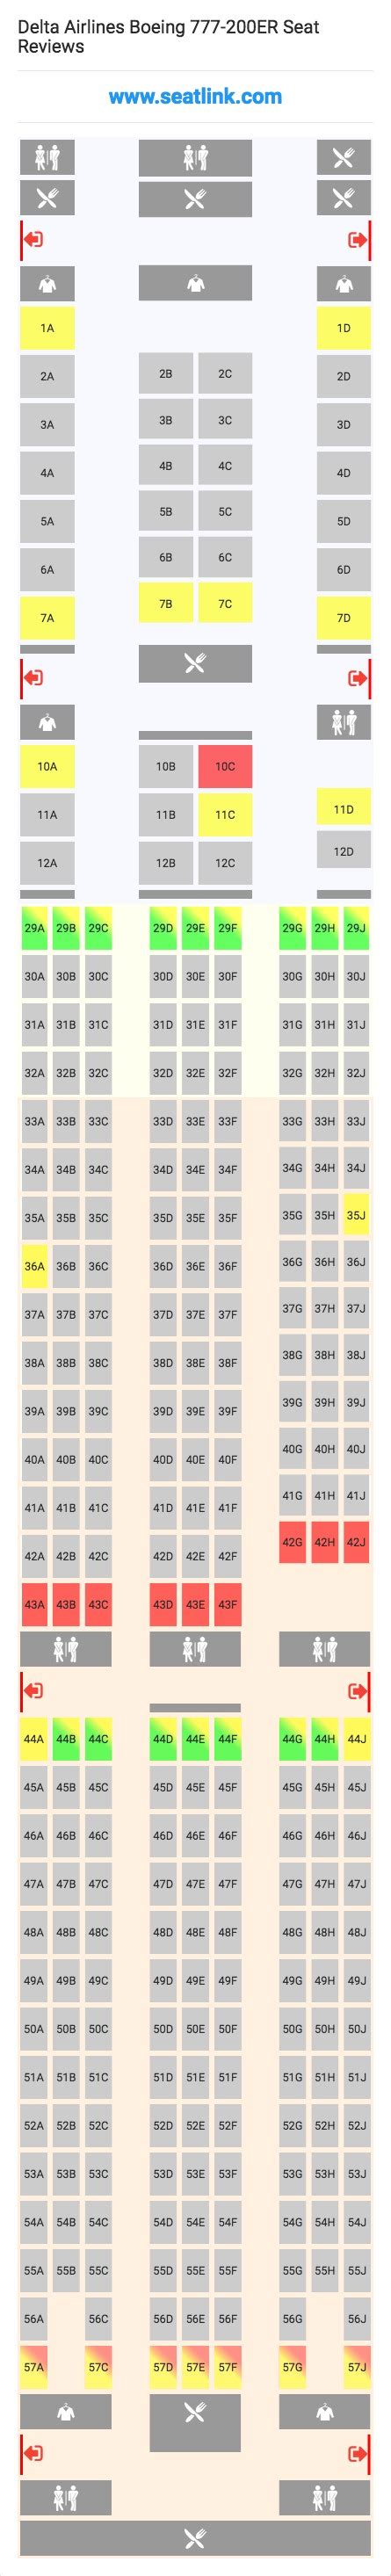 delta airlines boeing 777-200 seat map